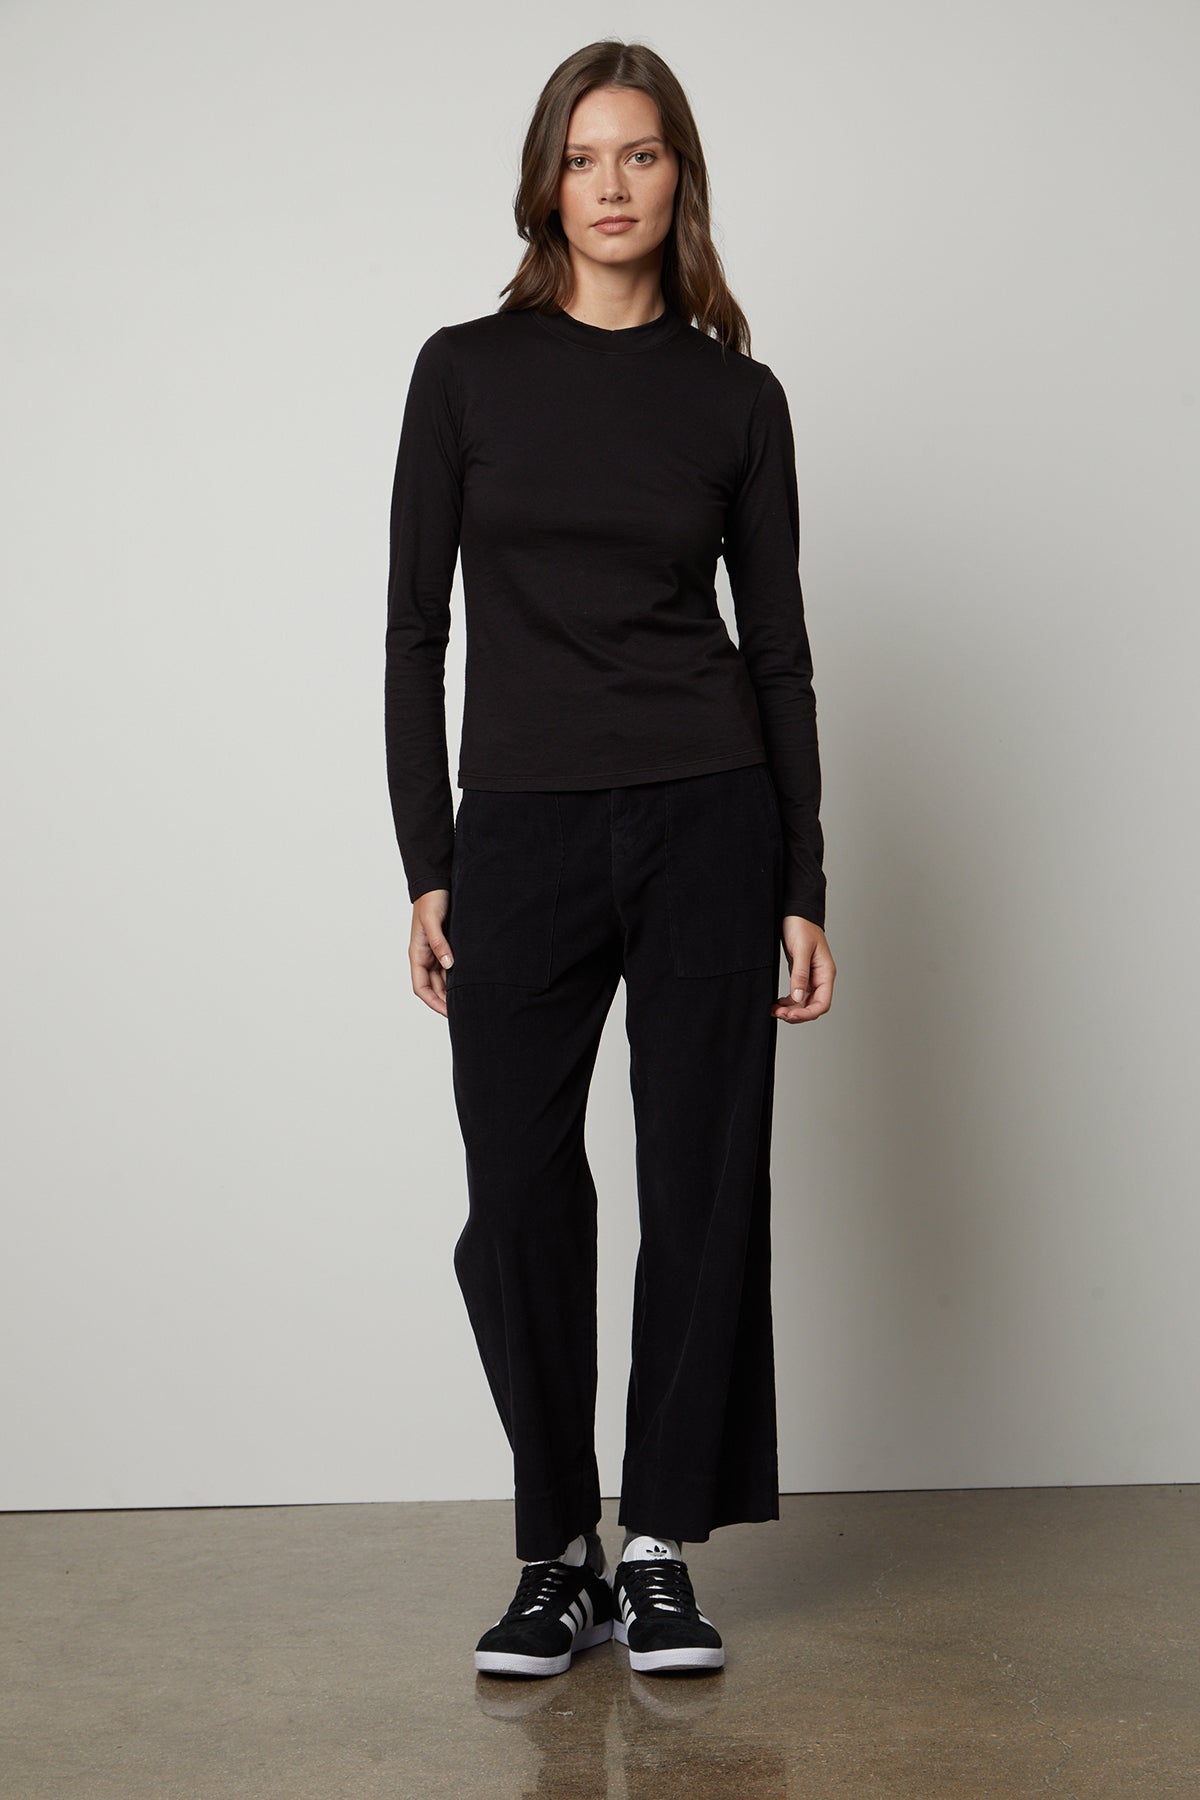   The model is wearing the VERA CORDUROY WIDE LEG PANT by Velvet by Graham & Spencer. 